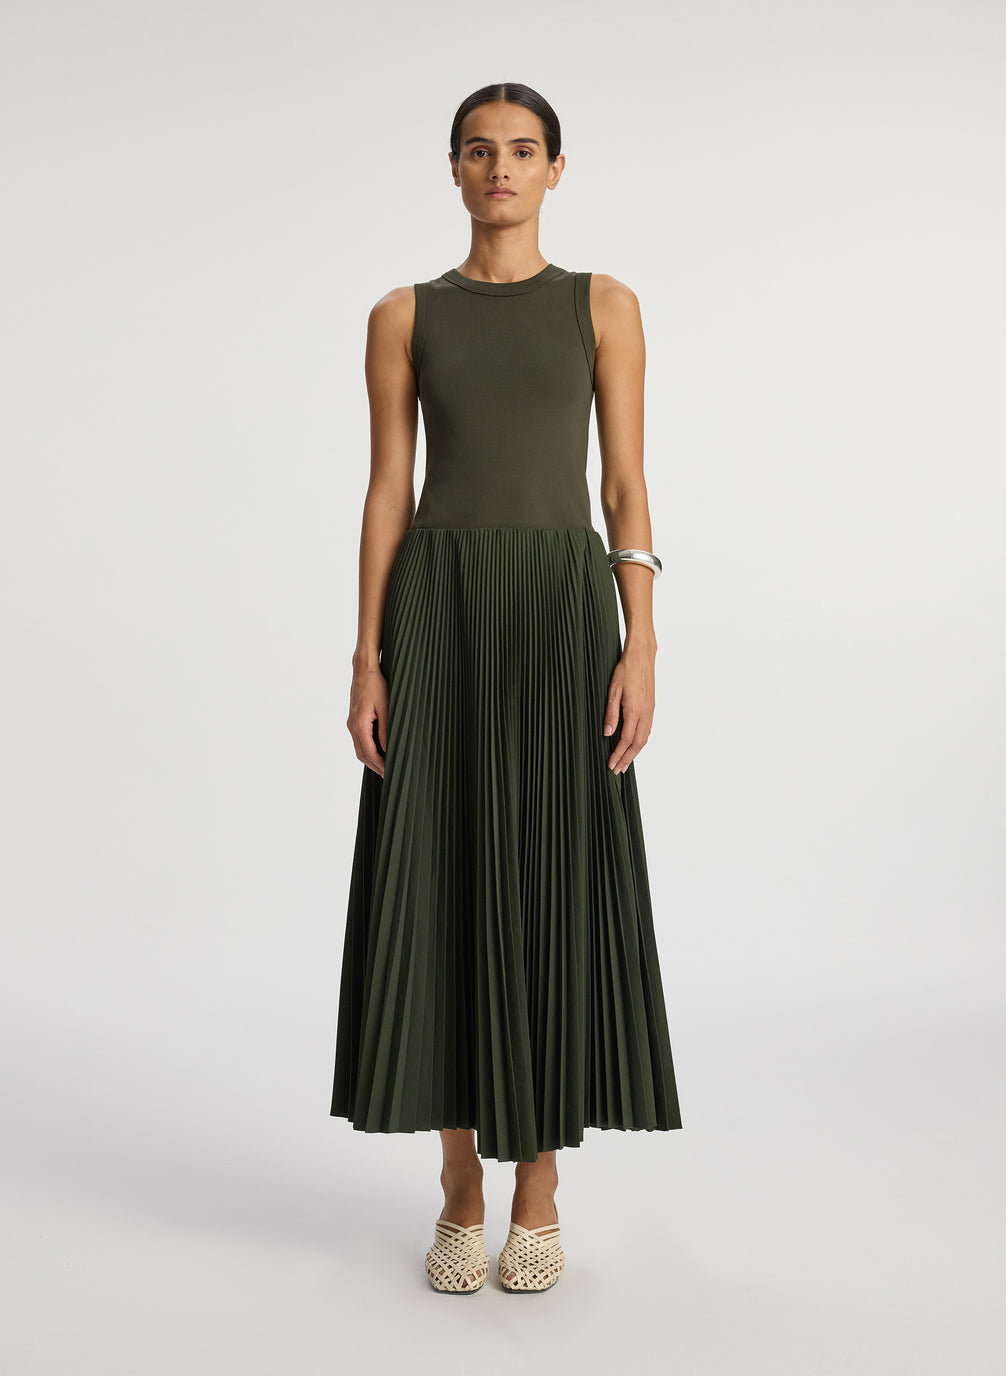 front  view of woman wearing olive green tank with olive green pleated midi skirt